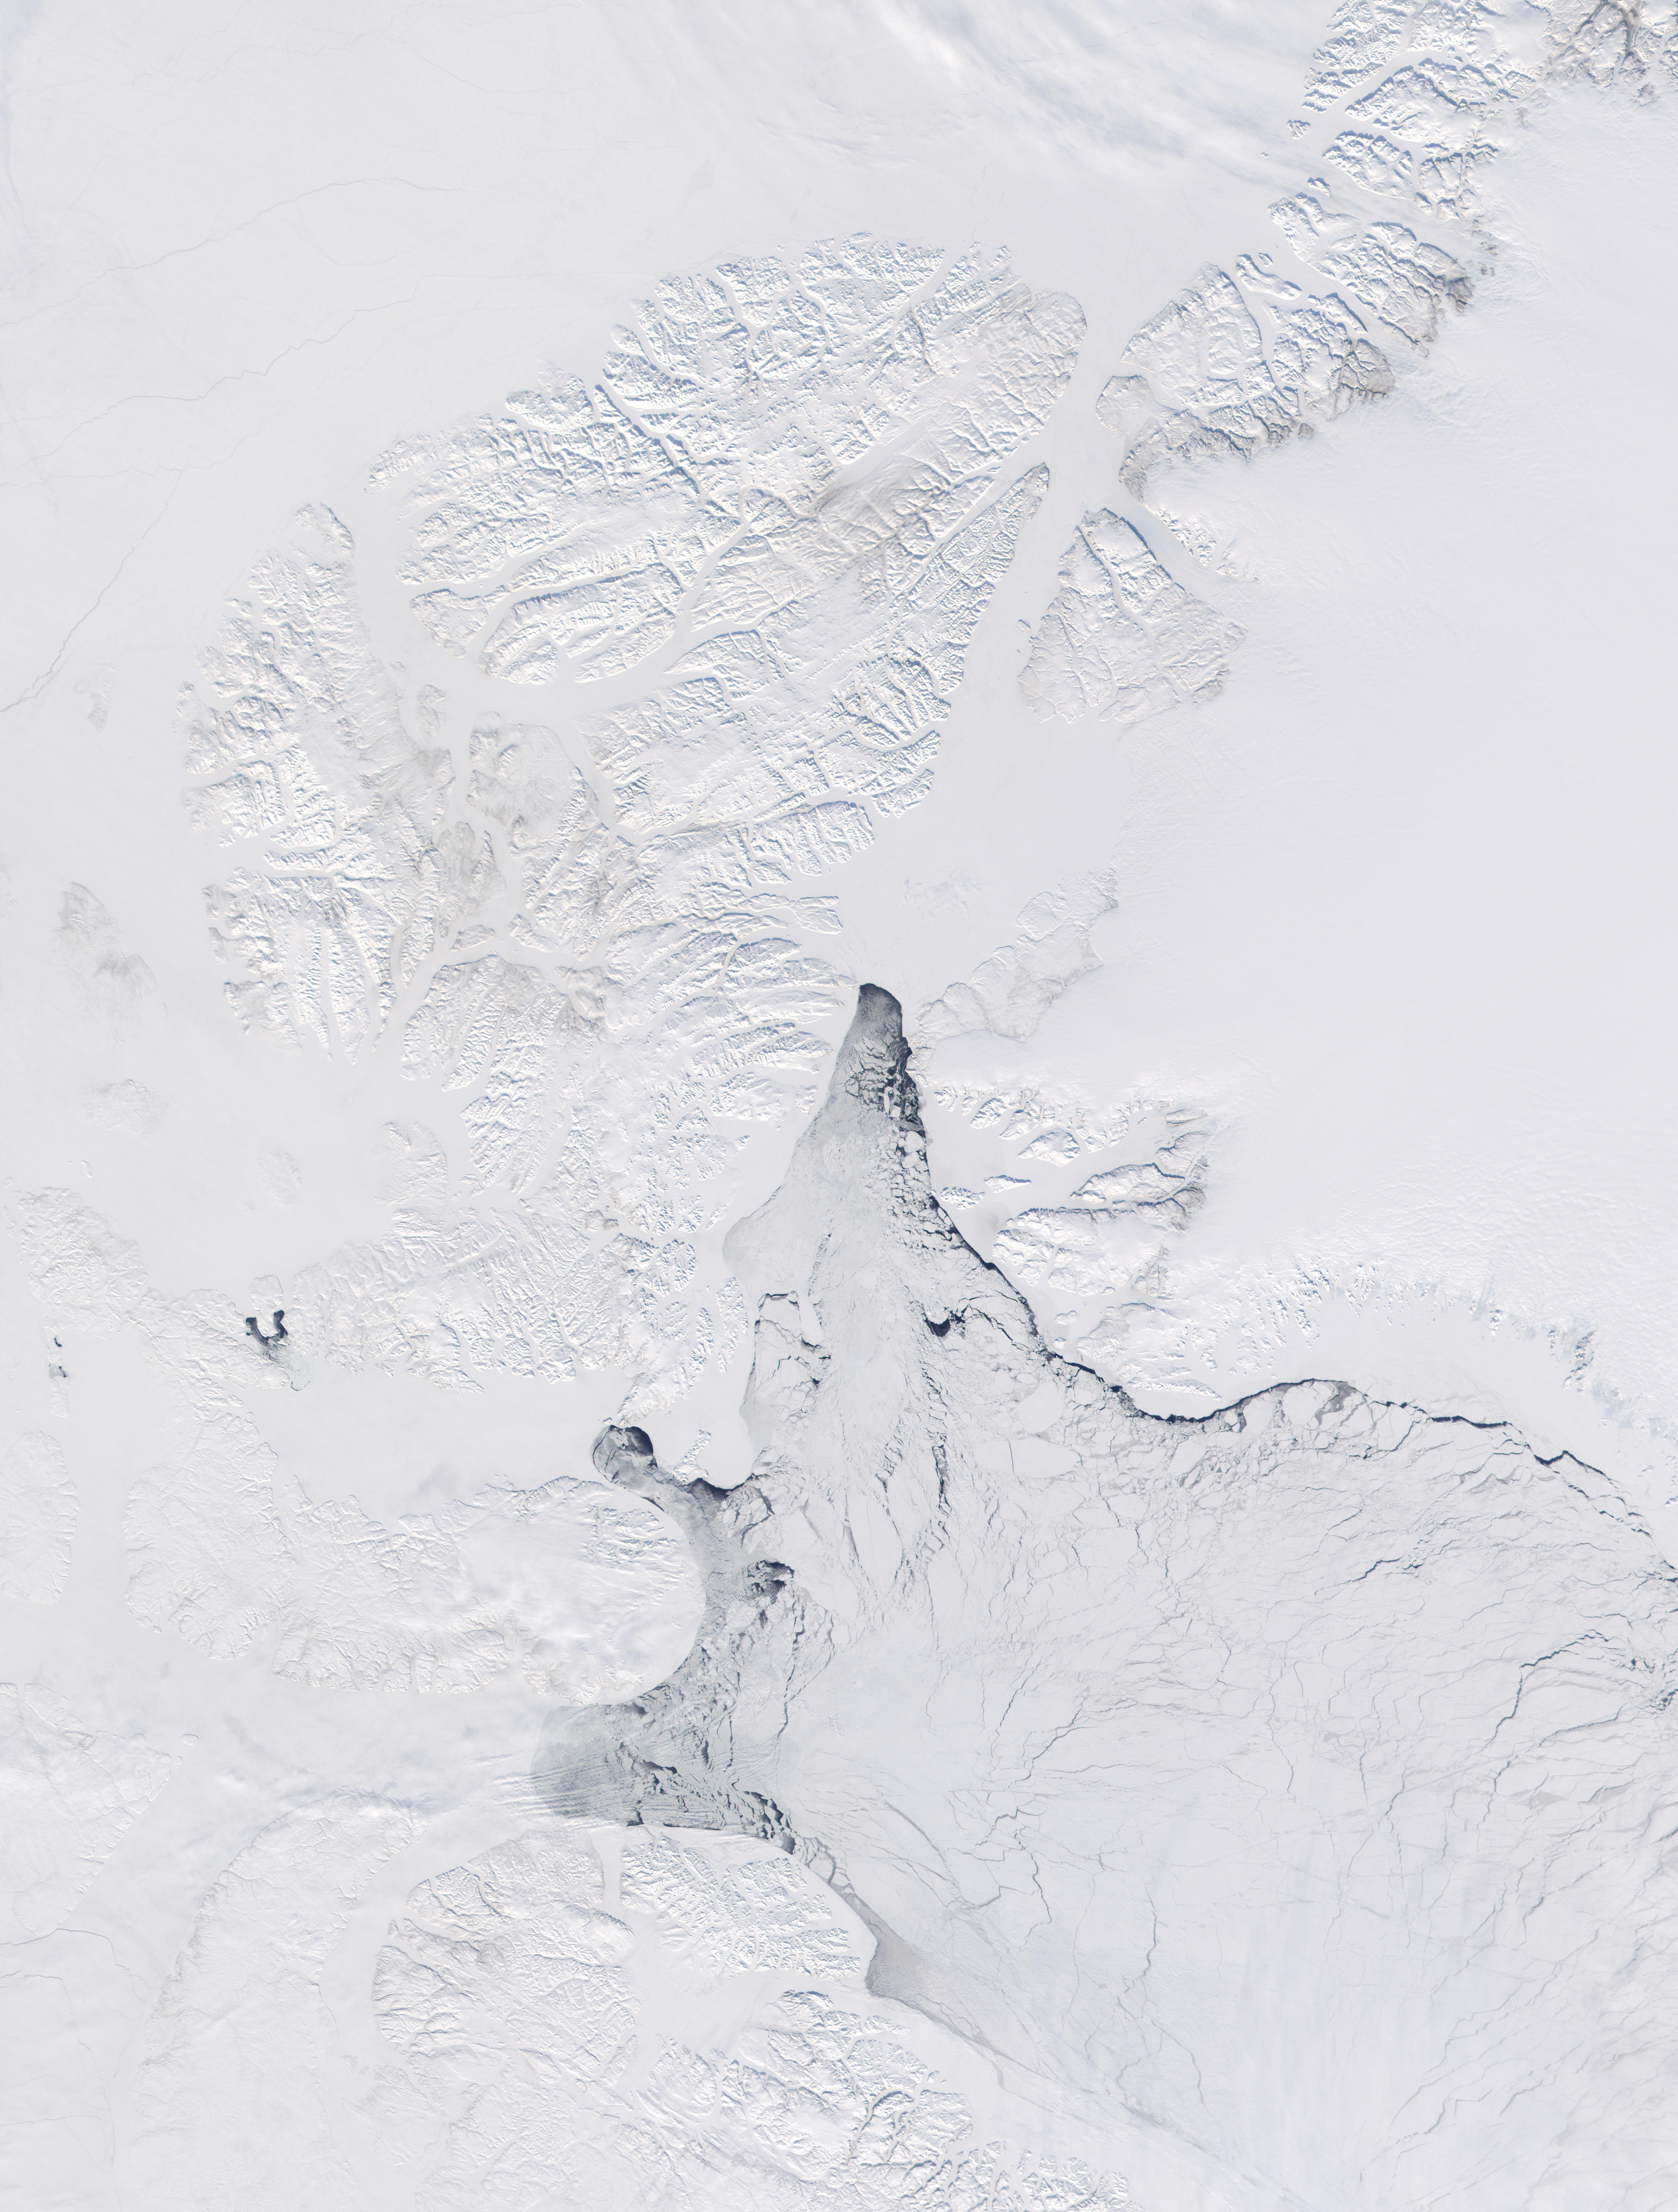 Baffin Bay, Ellesmere Island (Northernmost Canada) and North Coast of Greenland - related image preview